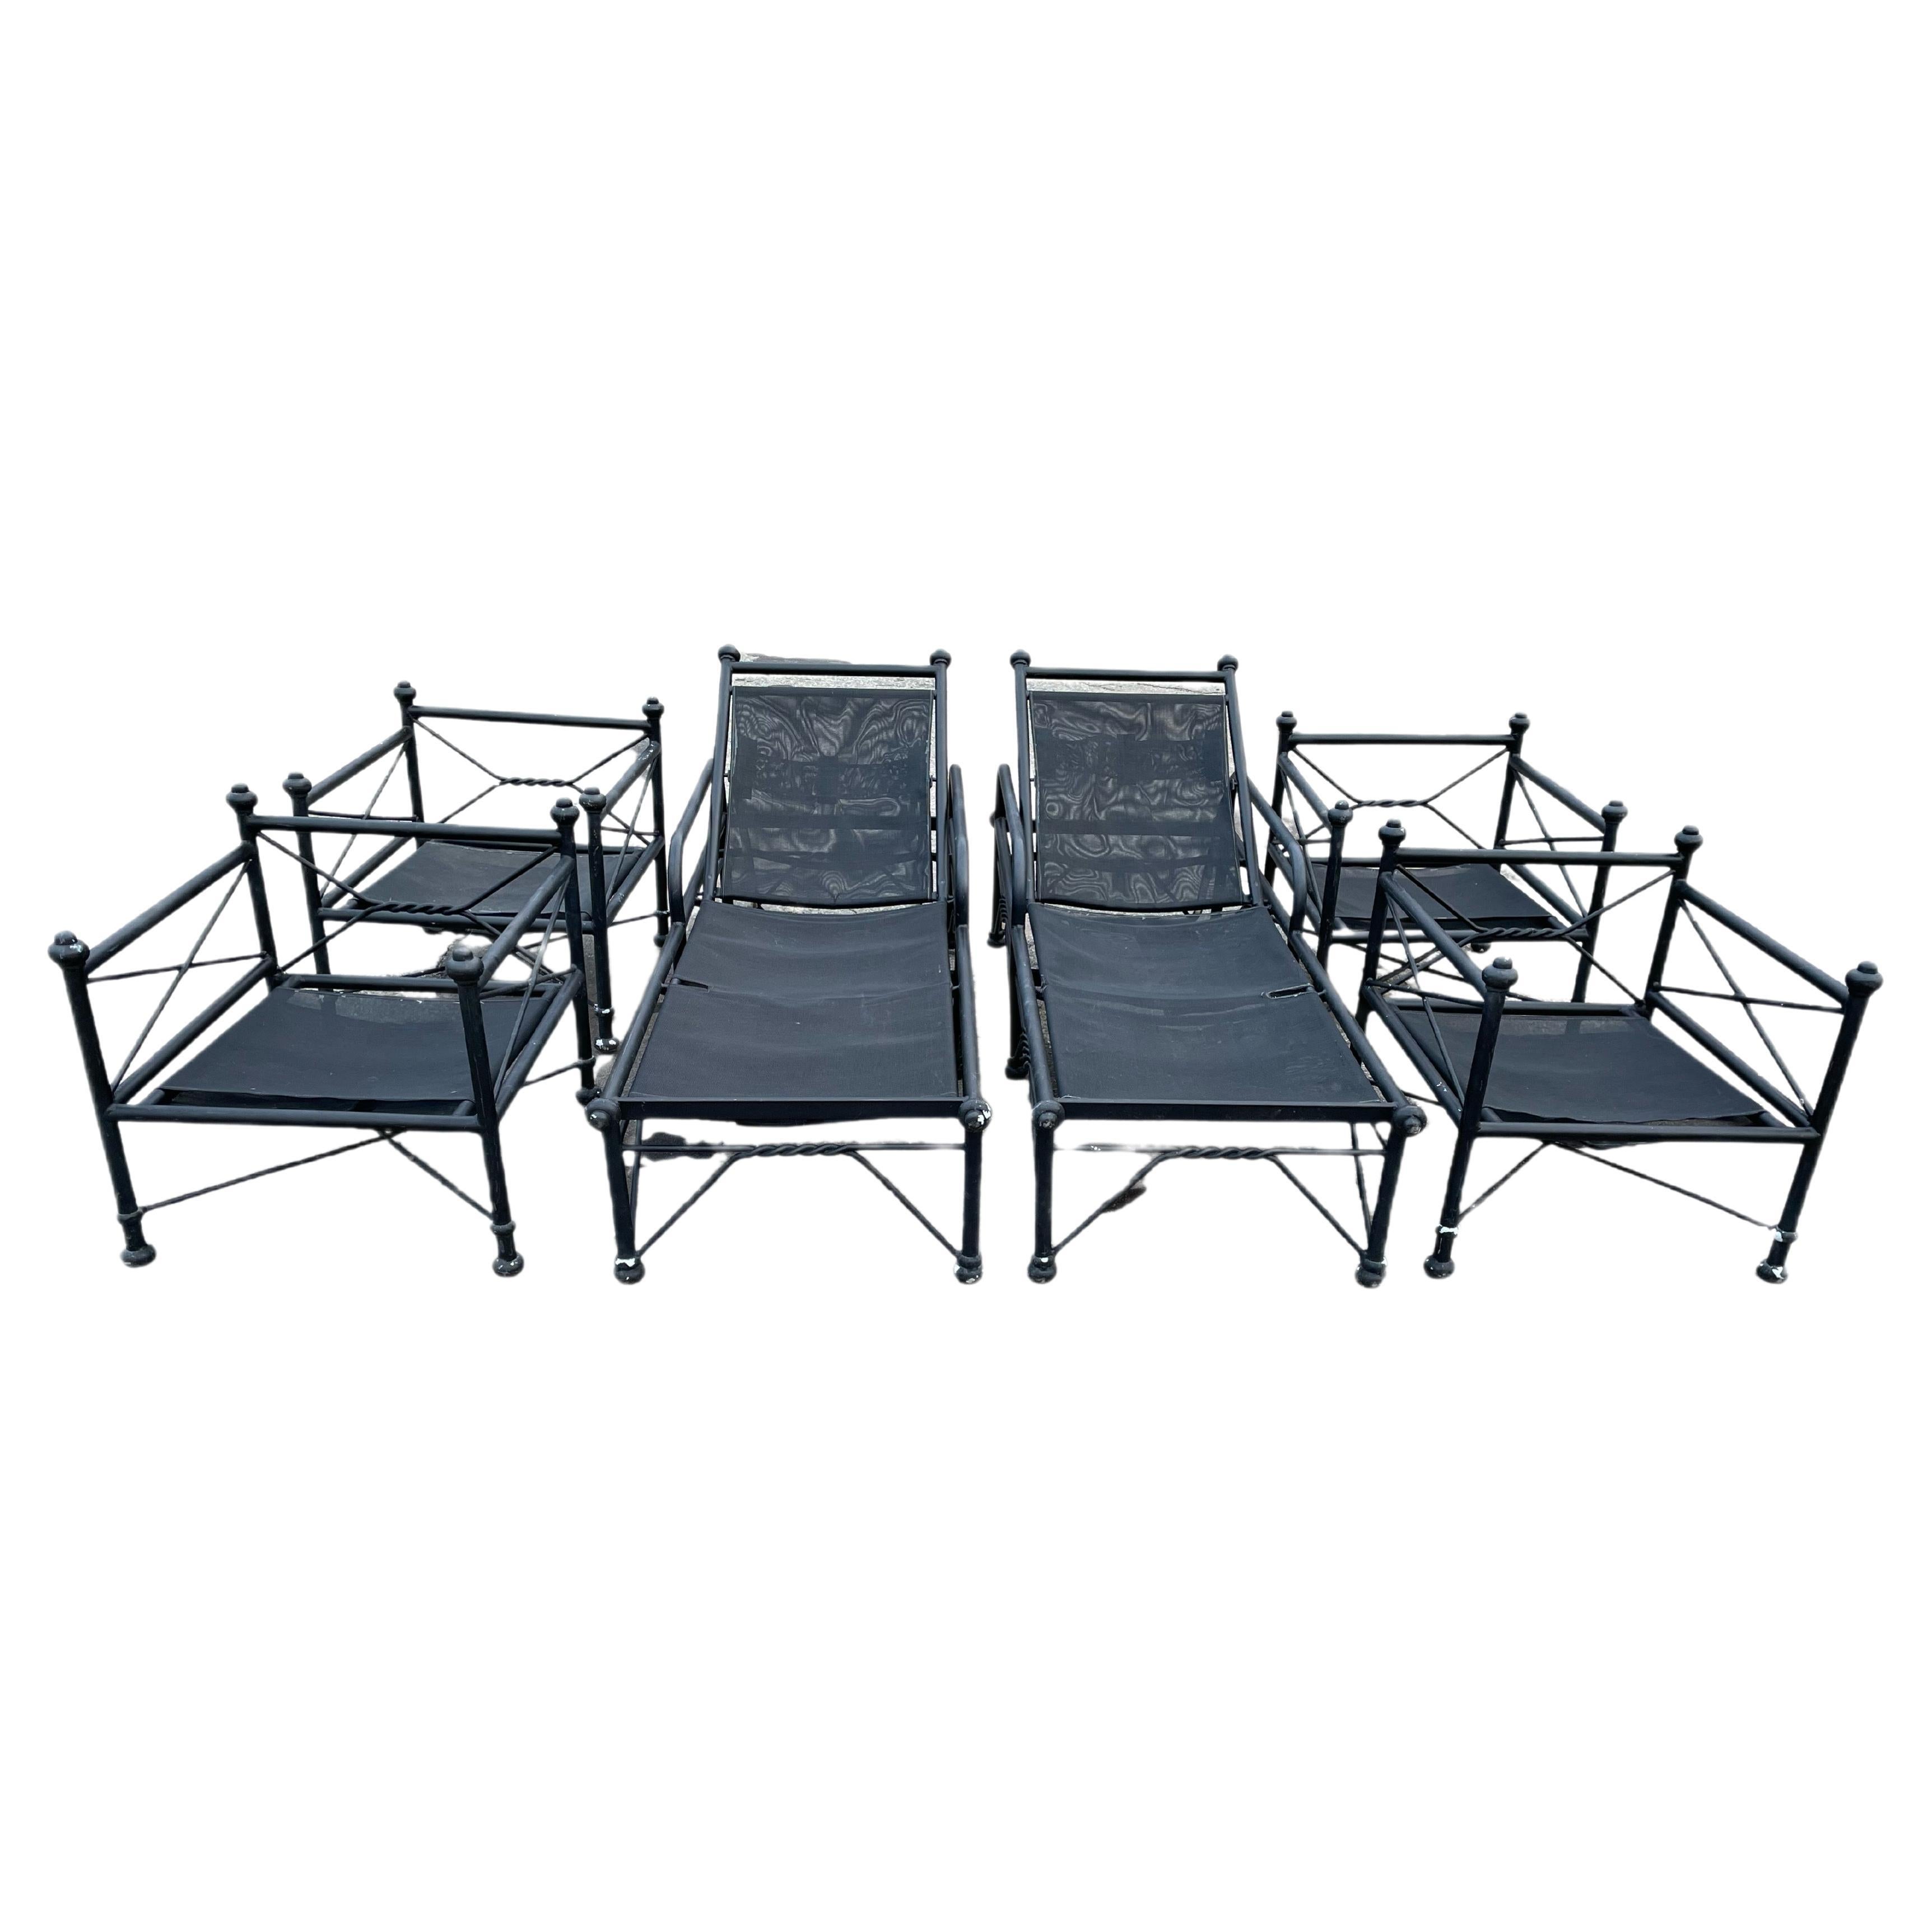 Vintage Outdoor Metal Patio Furniture -A Suite 

In the style of Giacometti 

4 Pool Deck Chairs
2 Pool Deck Chaise Lounge Chairs
48” Round Table

East to clean and quick drying mesh seating and back rests. Low profile. 

Perfect for any deck or